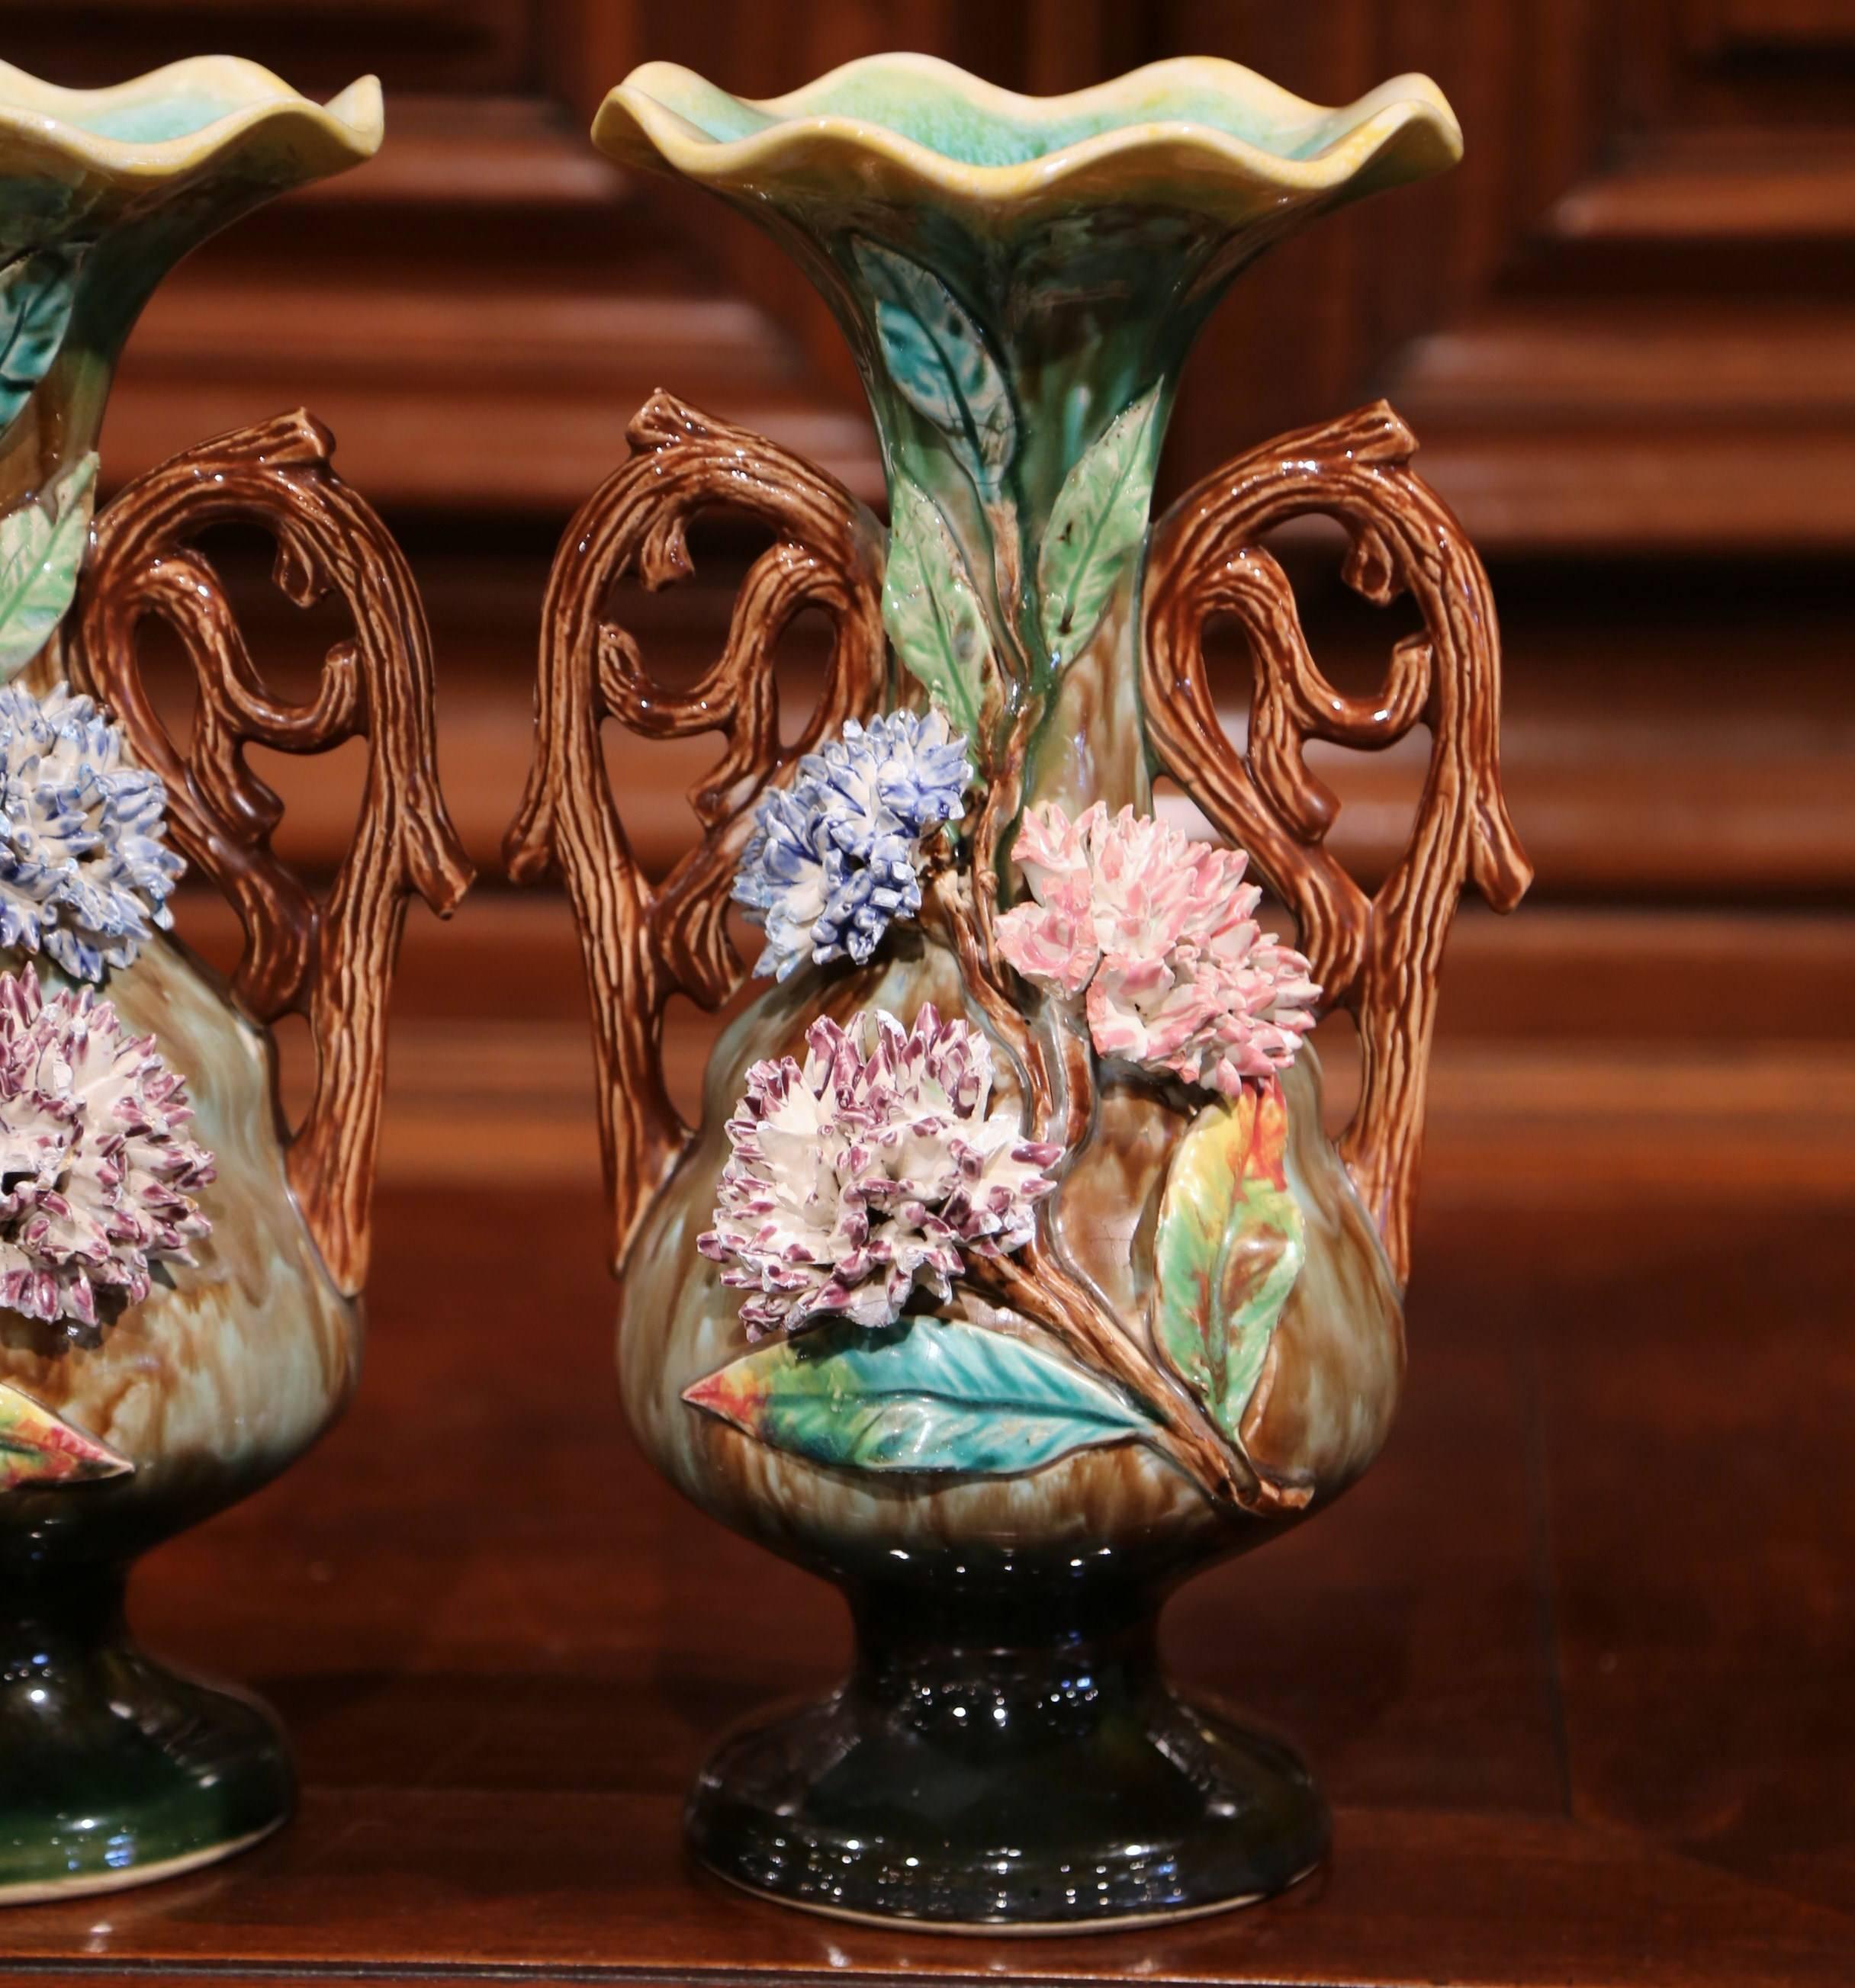 Ceramic Pair of 19th Century French Hand-Painted Barbotine Vases with Flowers and Leaves